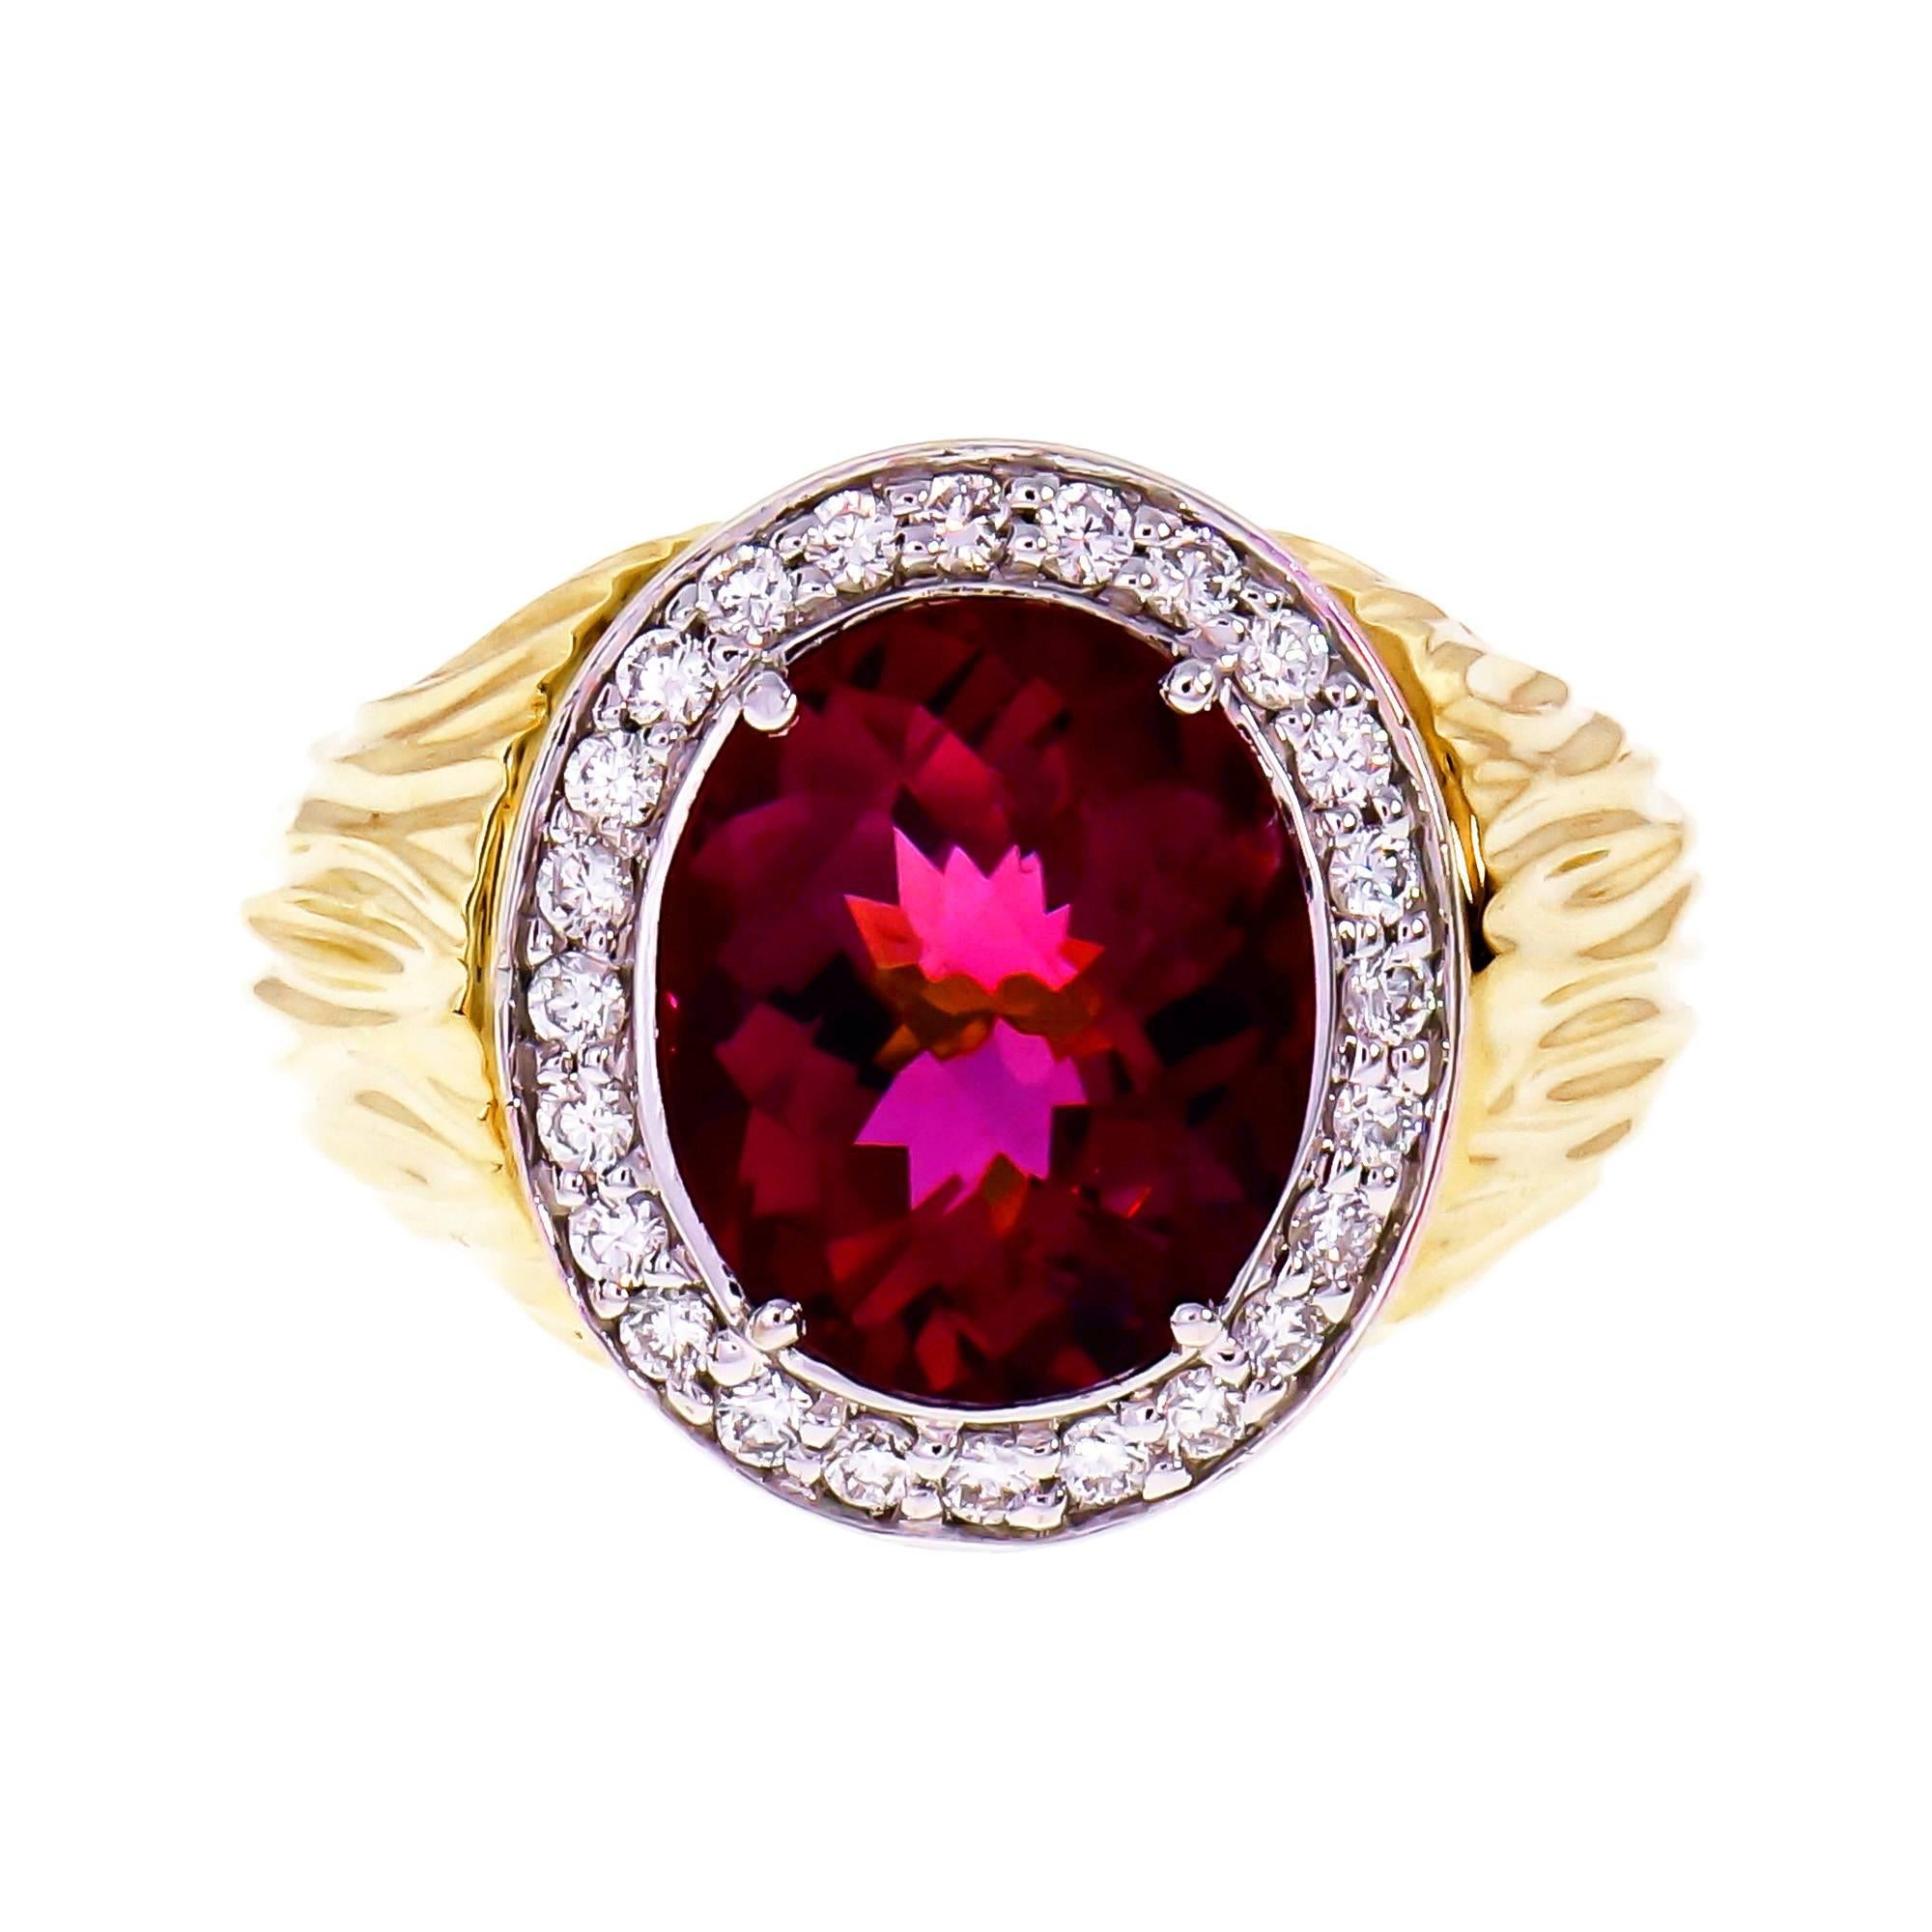 3.54 Carat Oval Faceted Pink Tourmaline Diamond Halo Gold Cocktail Ring